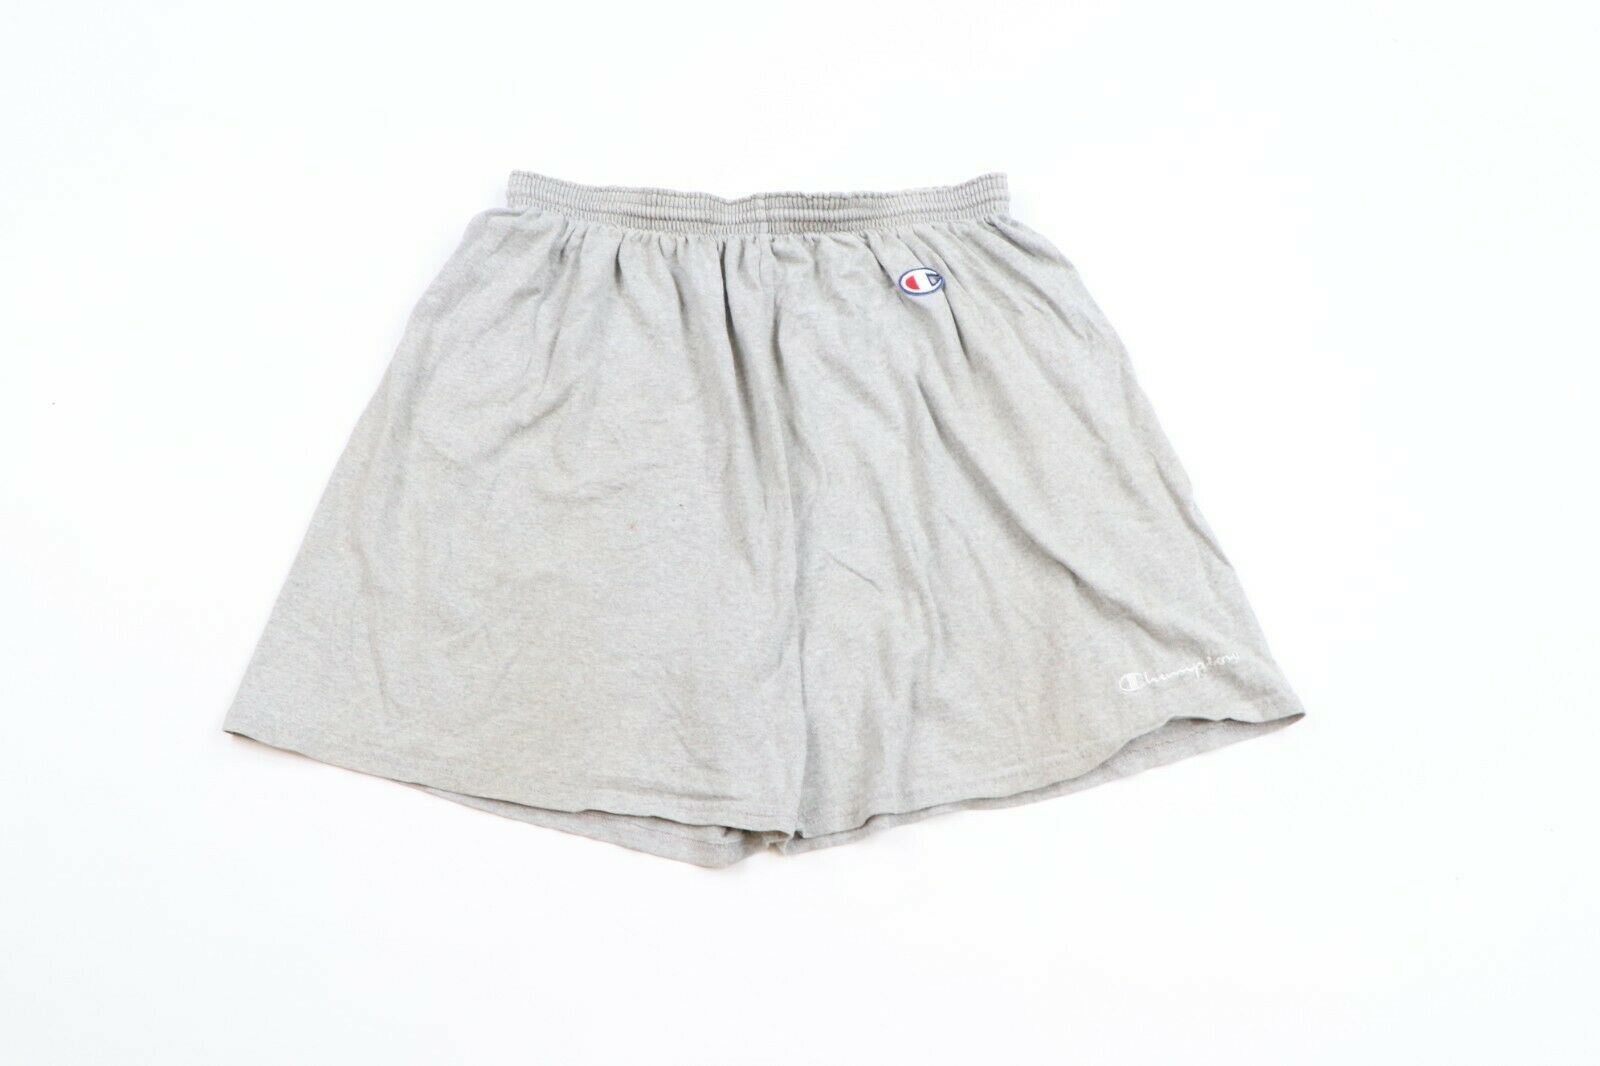 Vintage Vintage 90s Champion Above Knee Dad Shorts Gray Size US 38 / EU 54 - 1 Preview